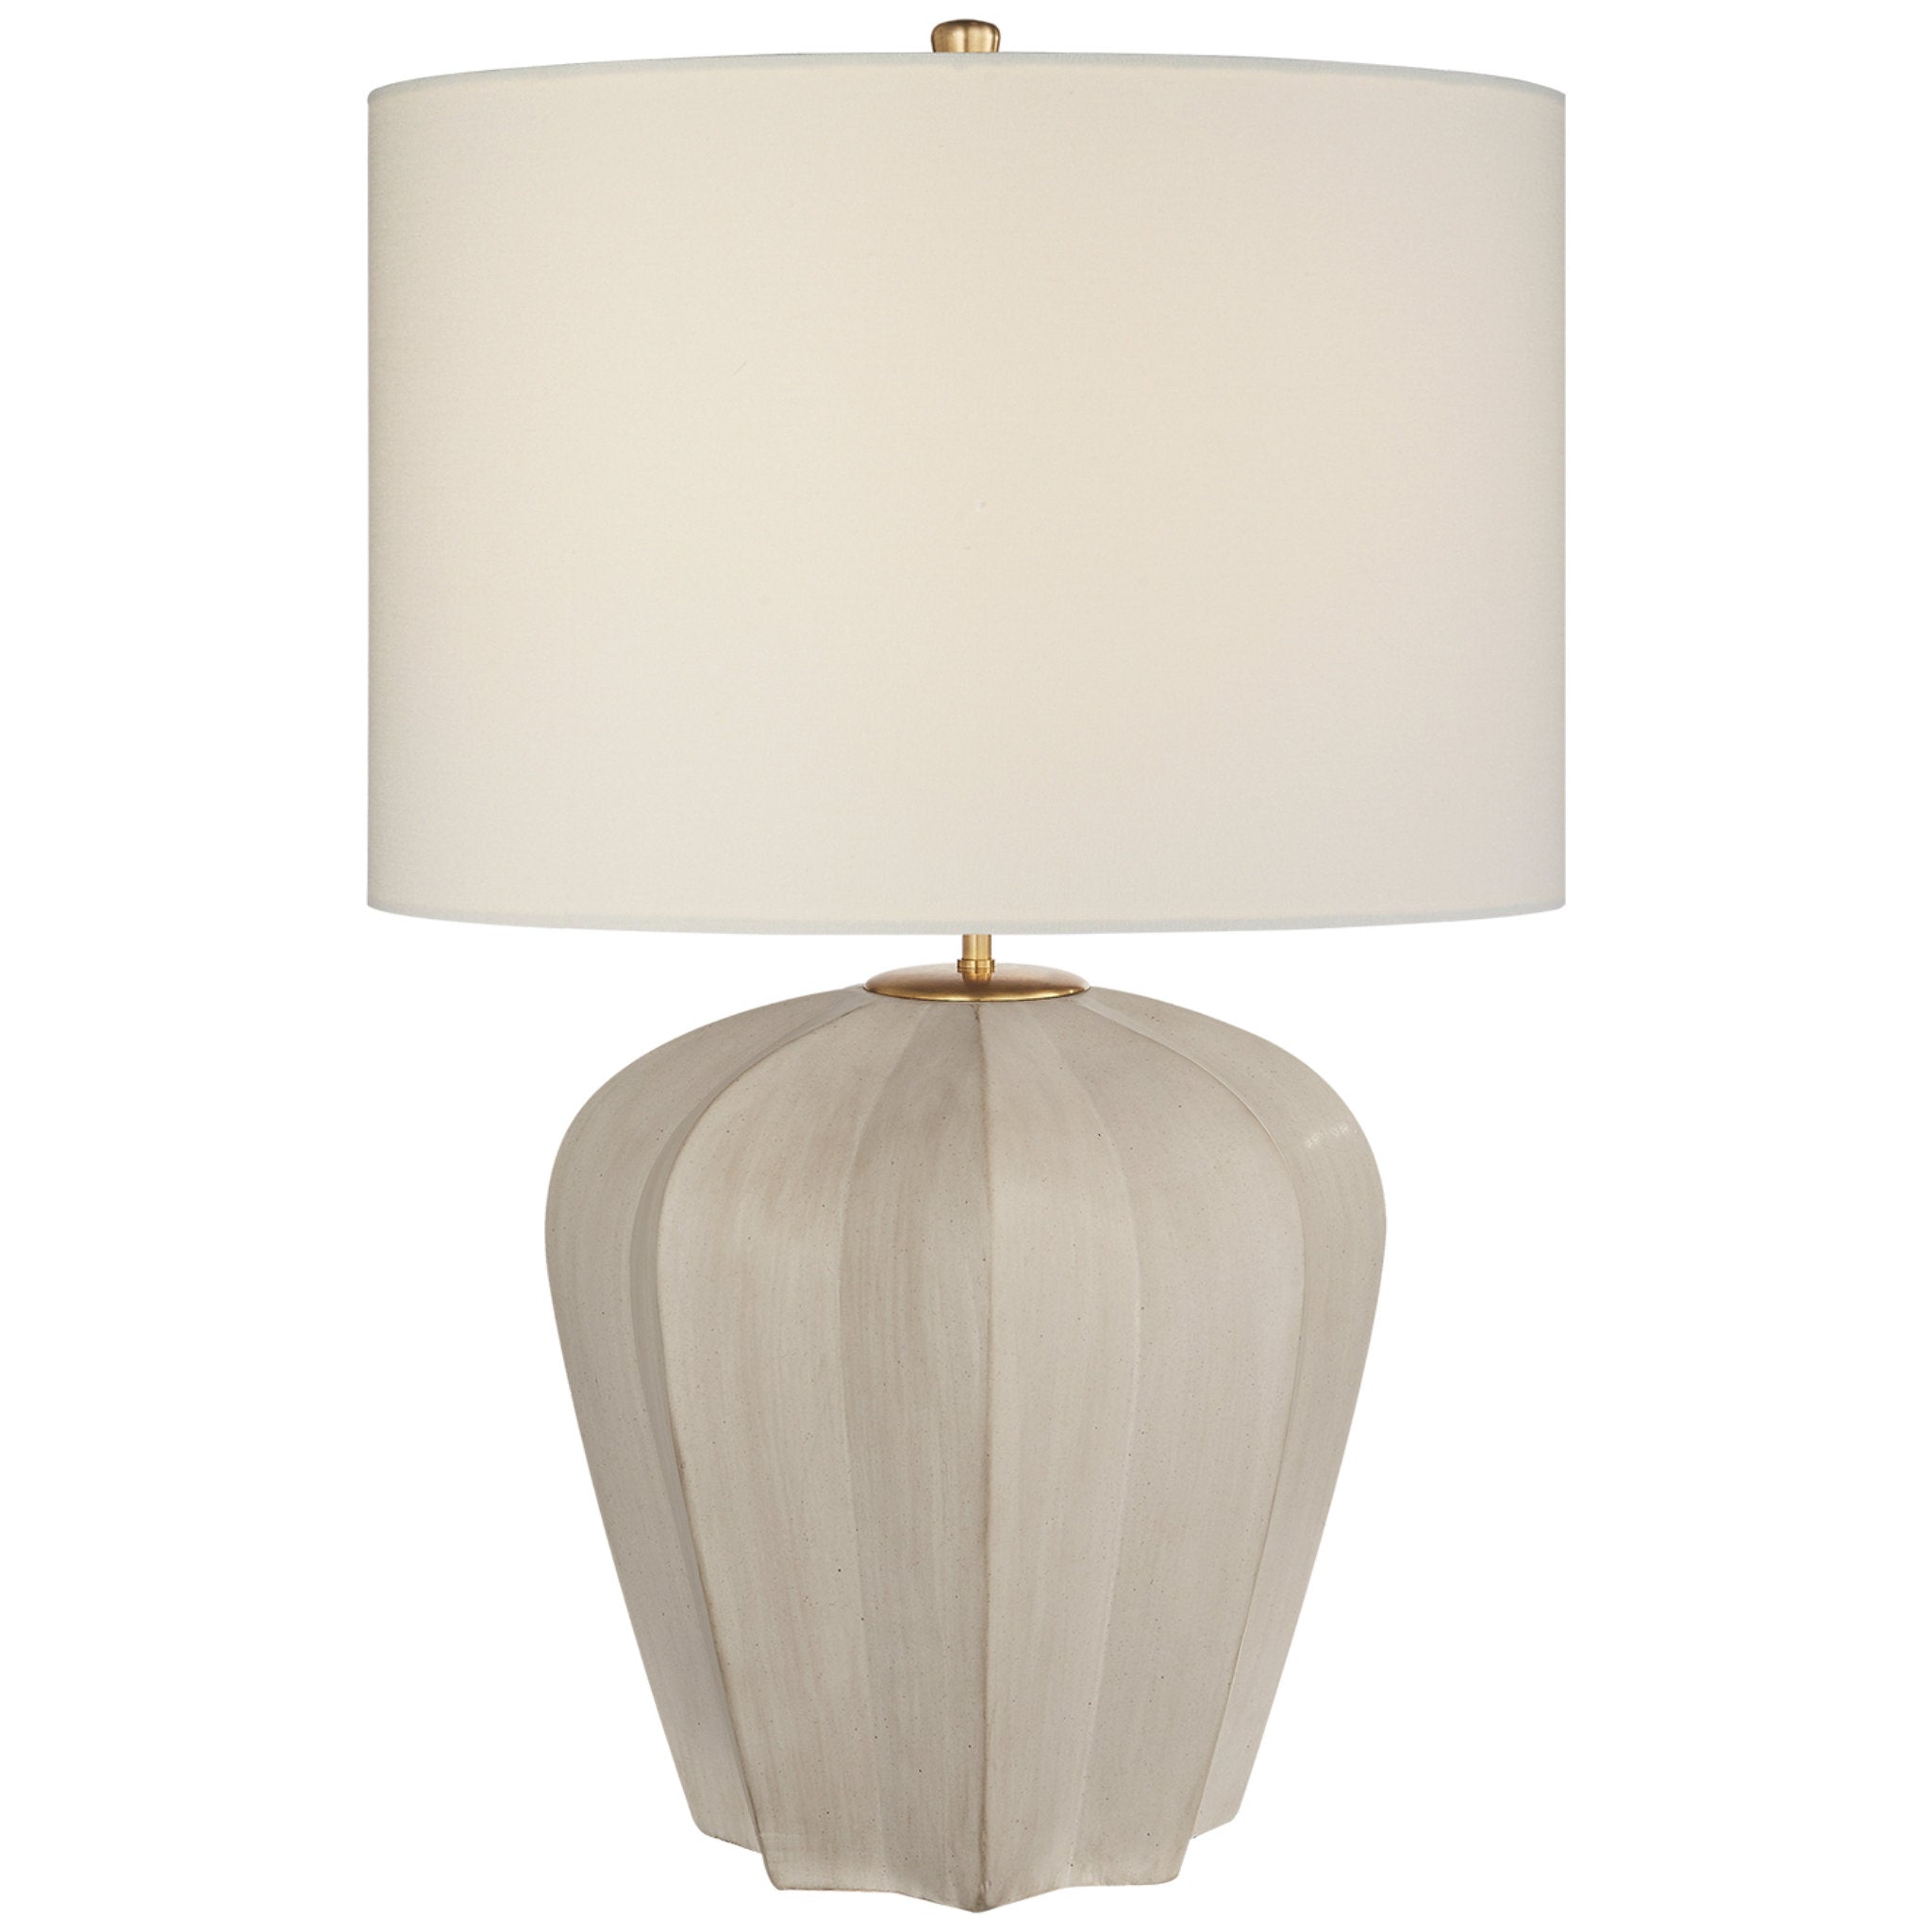 AERIN Pierrepont Medium Table Lamp in Stone White with Linen Shade